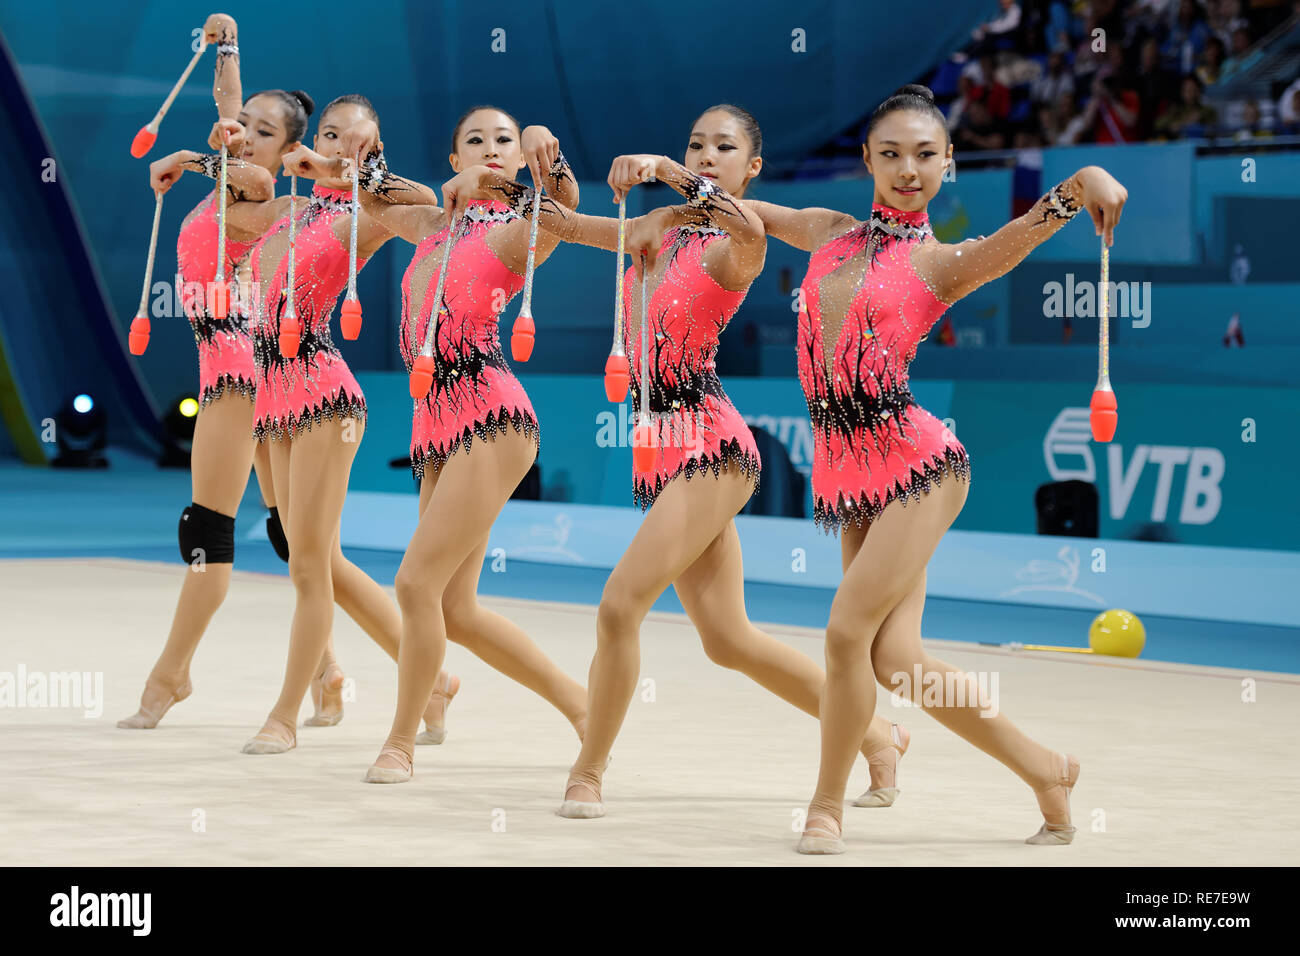 Kiev, Ukraine - August 31, 2013: Team Korea performs with clubs during 32nd Rhythmic Gymnastics World Championships. The event is held in the Palace o Stock Photo